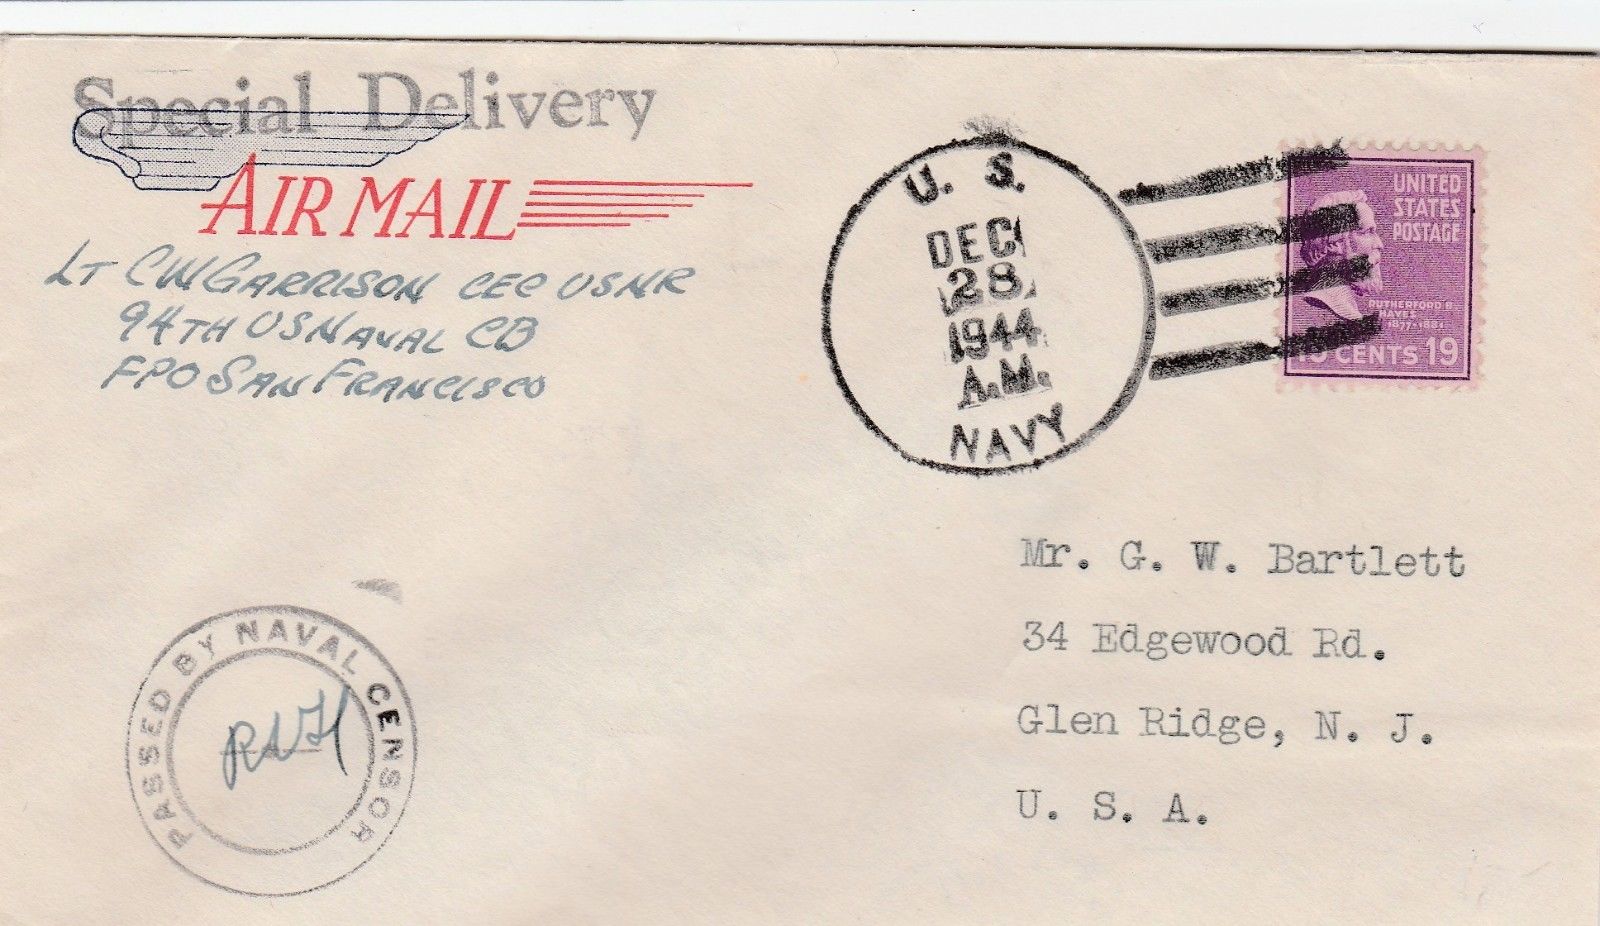 US NAVY FPO SAN FRANCISCO 19c Prexie solo Airmail Special Delivery Censor 1944